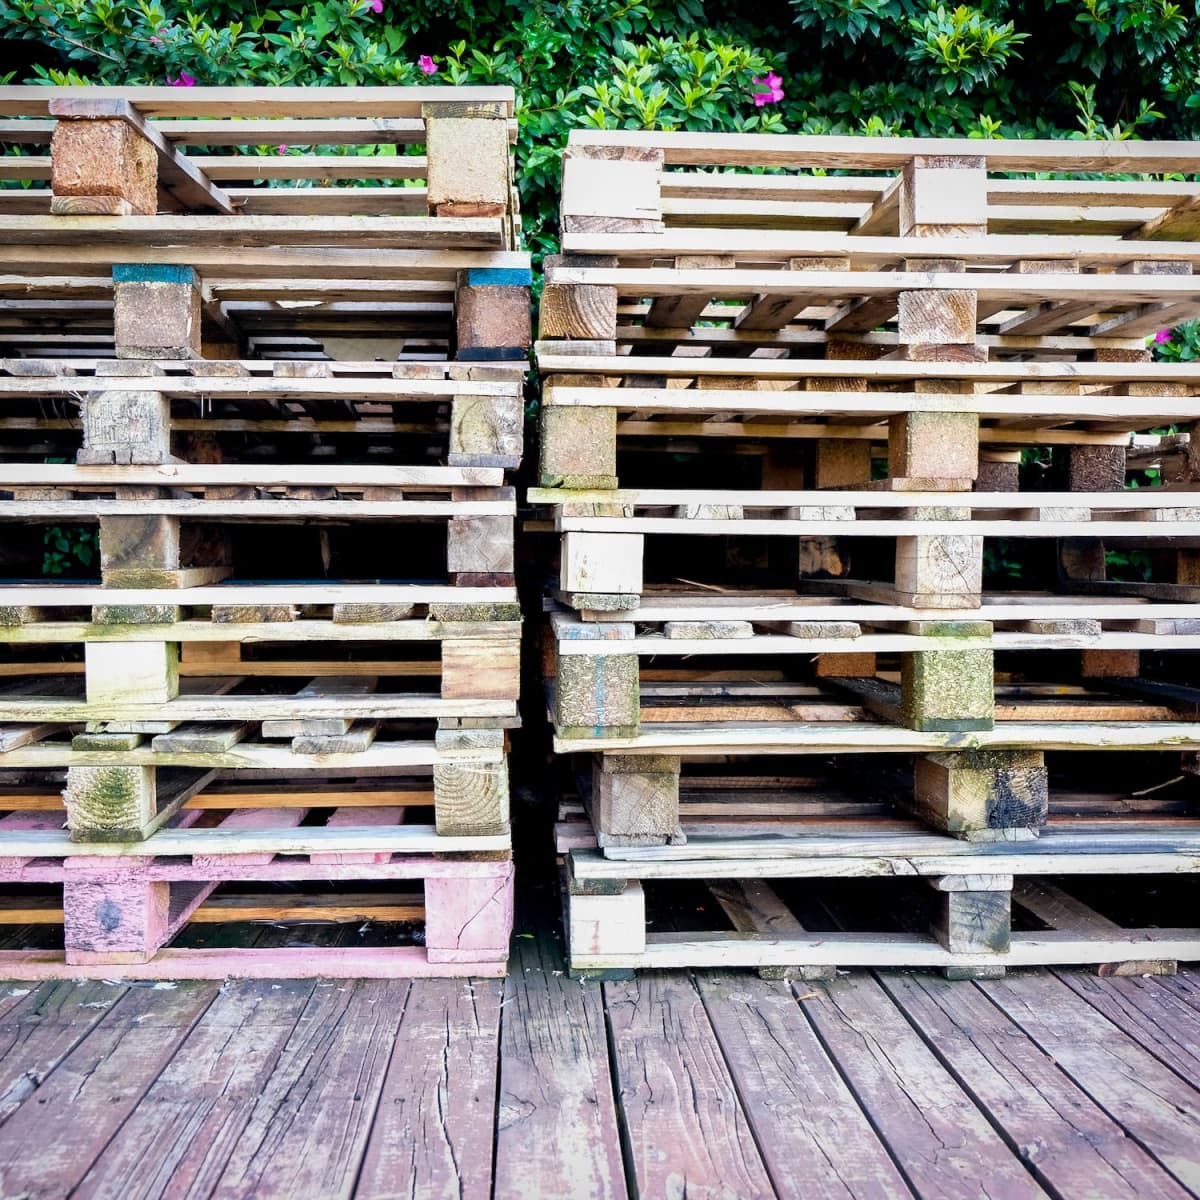 Making Scrap Wood Projects from Pallets, Reclaimed Wood and Salvaged Lumber  - HubPages